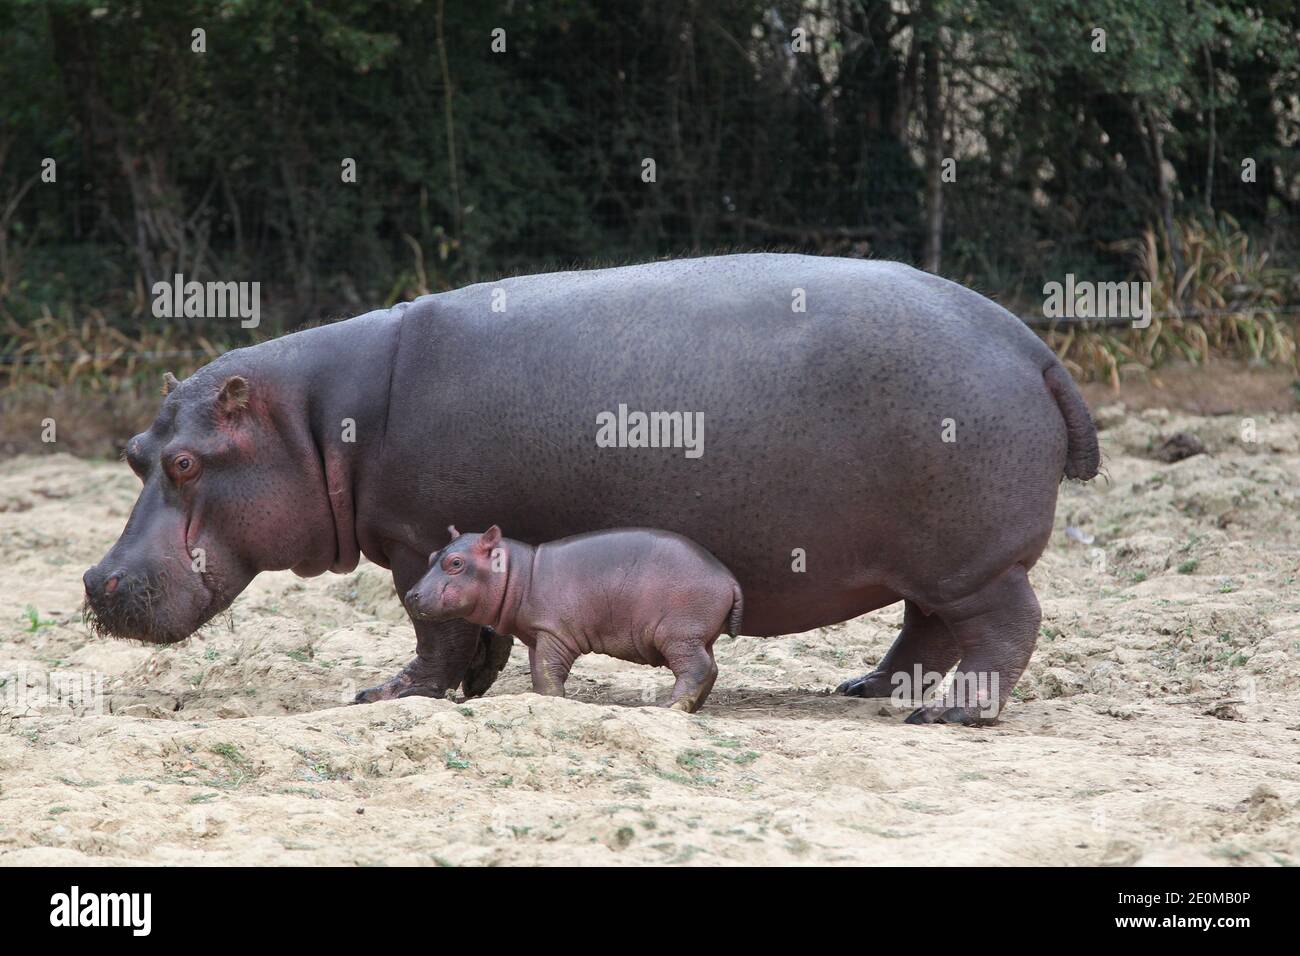 A seven-day-old hippopotamus is pictured next to his mother, Kara, aged 21,  at 'Planet sauvage' (wild planet) zoo in Port-Saint-Pere, near Nantes,  western France on September 14, 2012. Photo by Laetitia  Notarianni/ABACAPRESS.COM